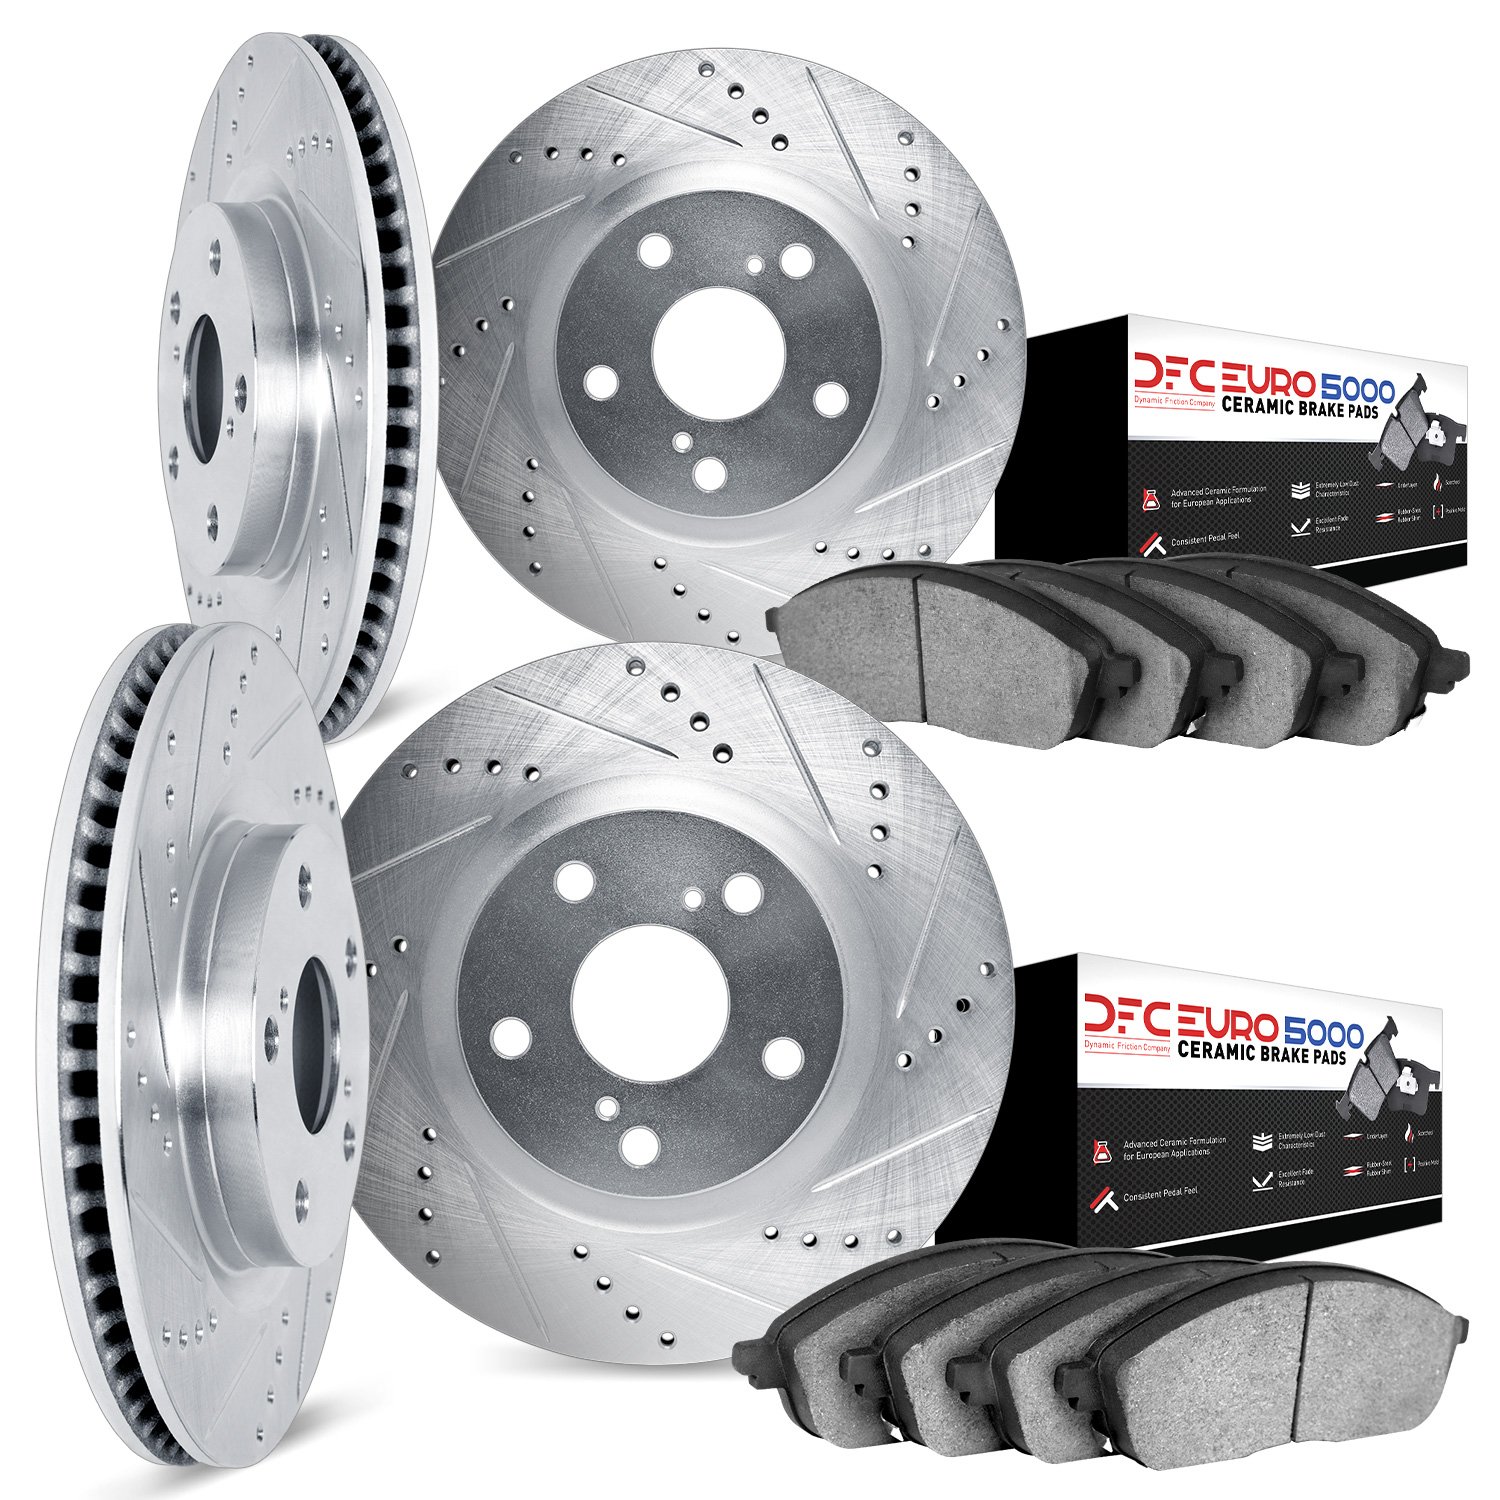 7604-16000 Drilled/Slotted Brake Rotors w/5000 Euro Ceramic Brake Pads Kit [Silver], 2017-2021 Alfa Romeo, Position: Front and R